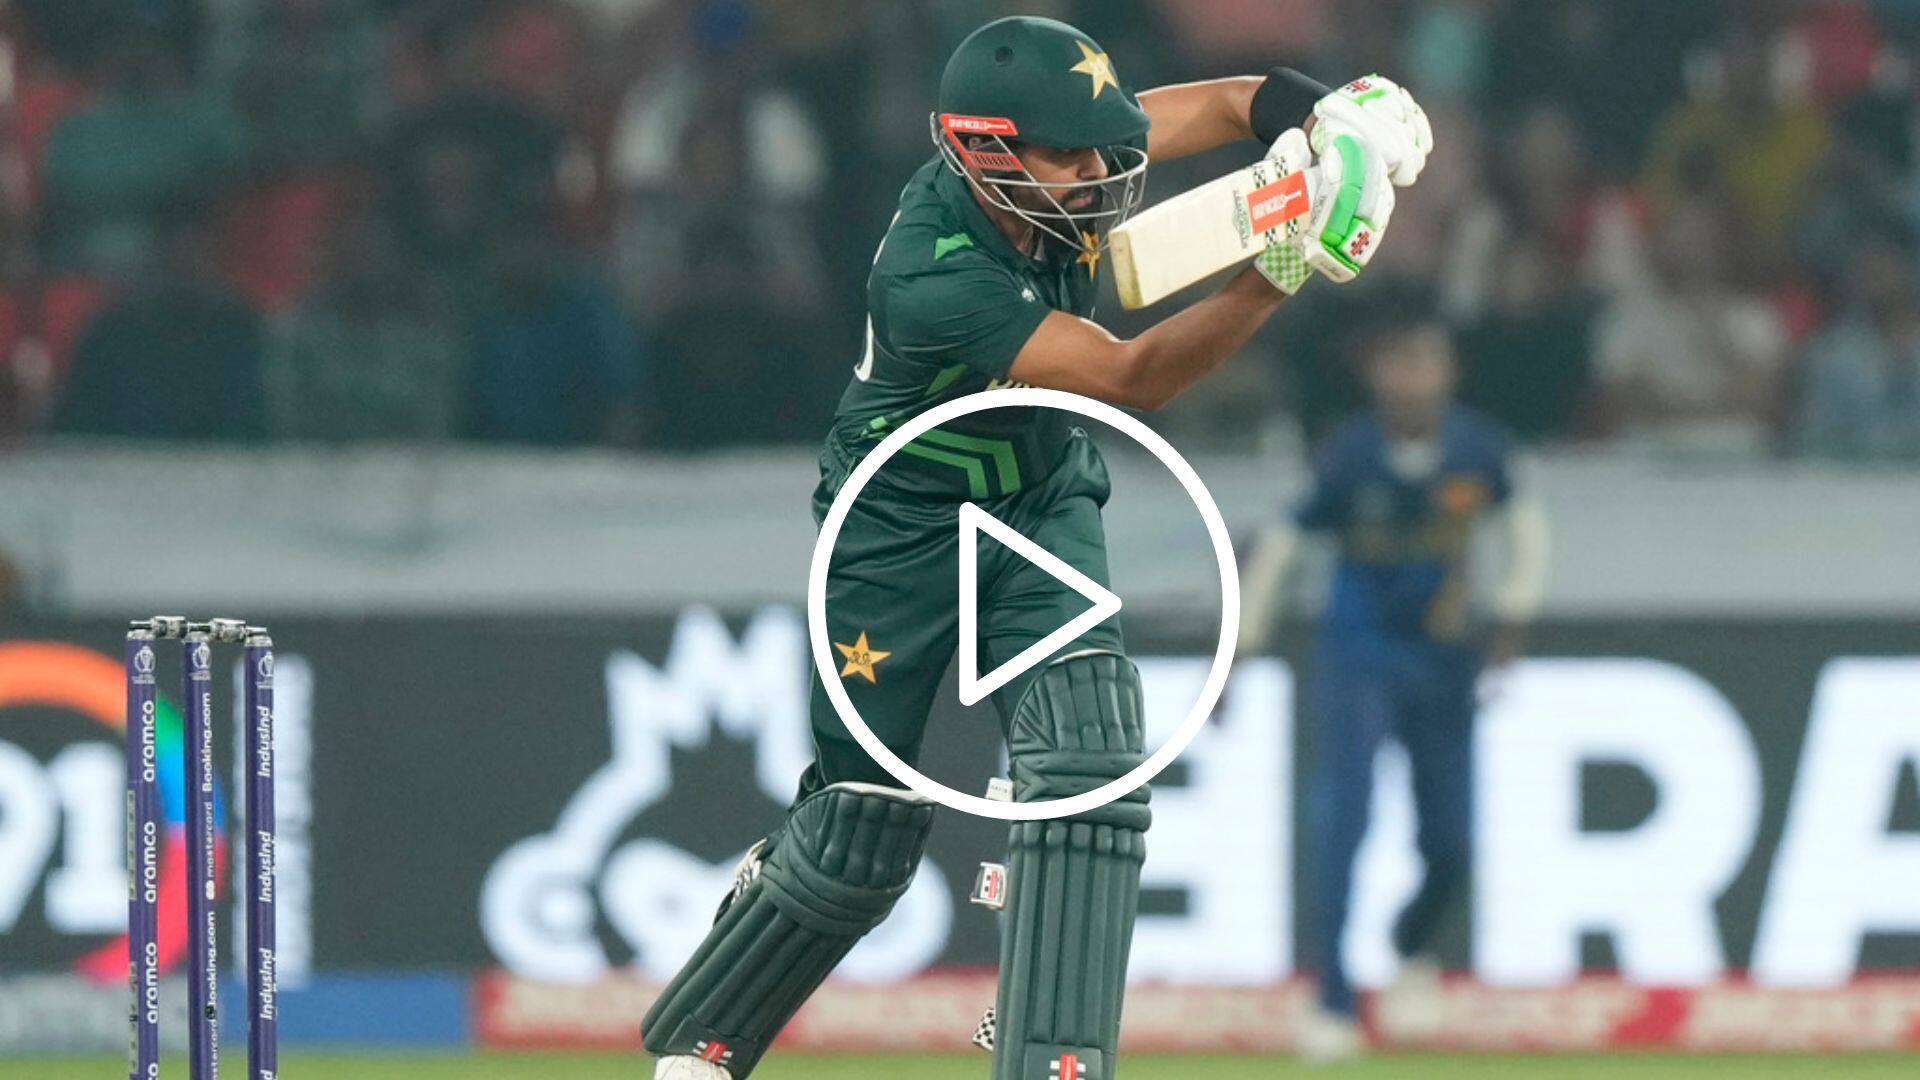 [Watch] Babar Azam Gets Off The Mark With A Glorious Boundary vs SL